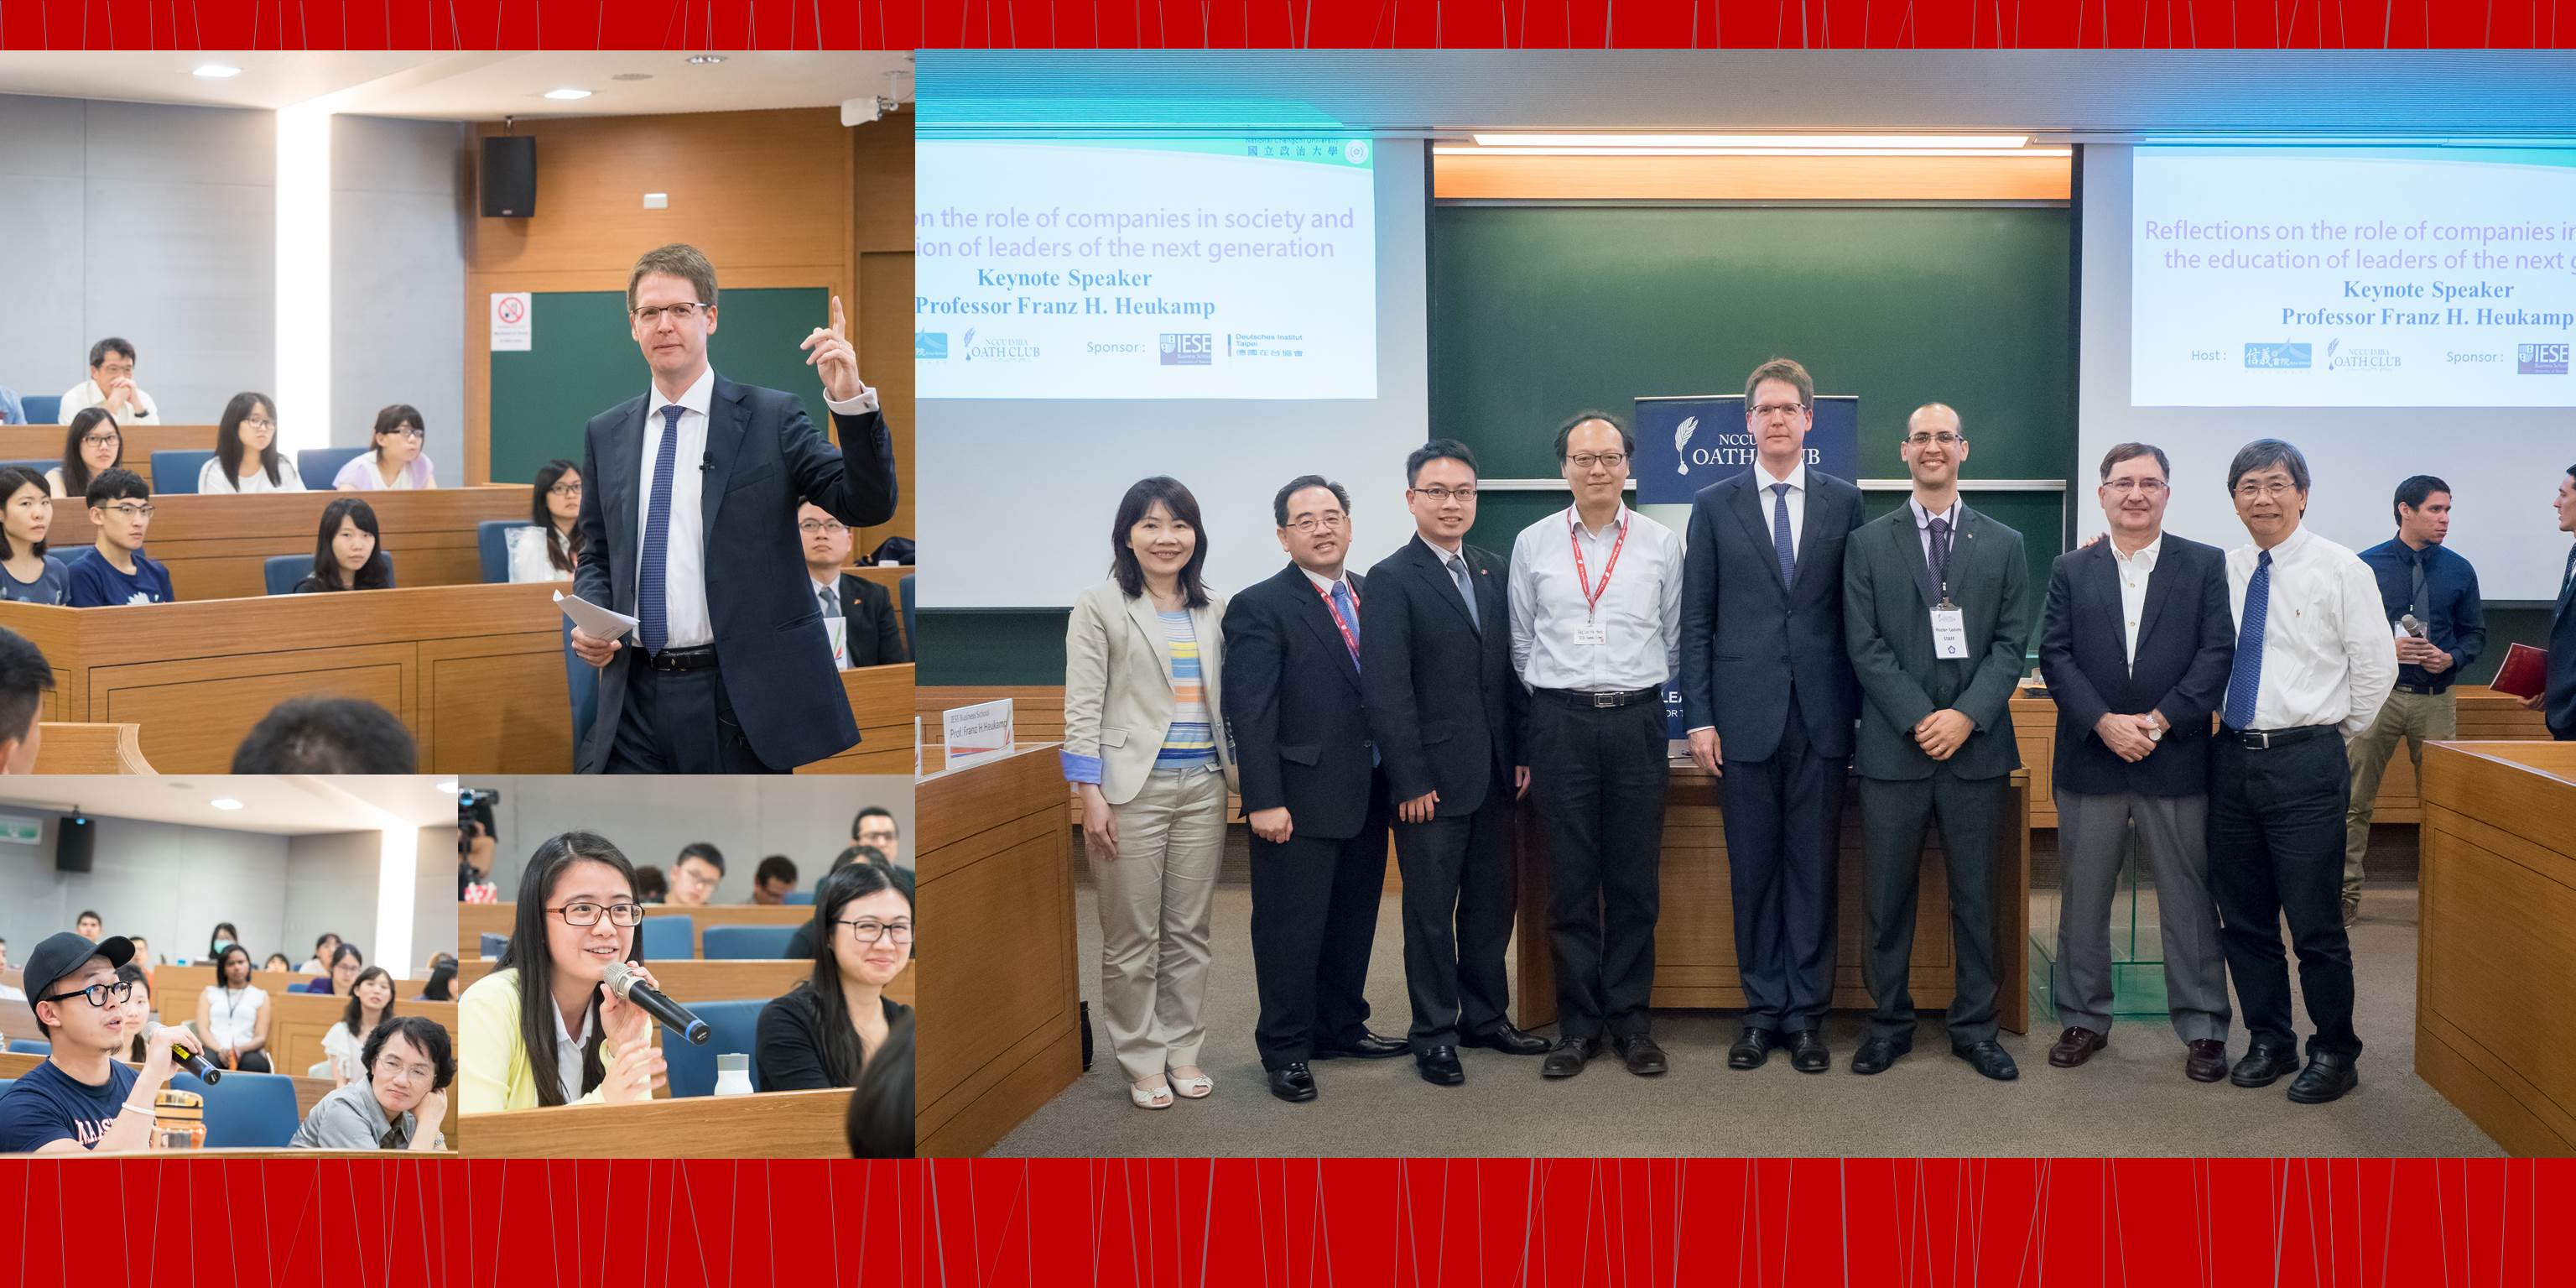 IESE Business School Prof. Franz H. Heukamp Speech <br> 'Reflections on the role of companies in society and the education of  leaders of the next generation'